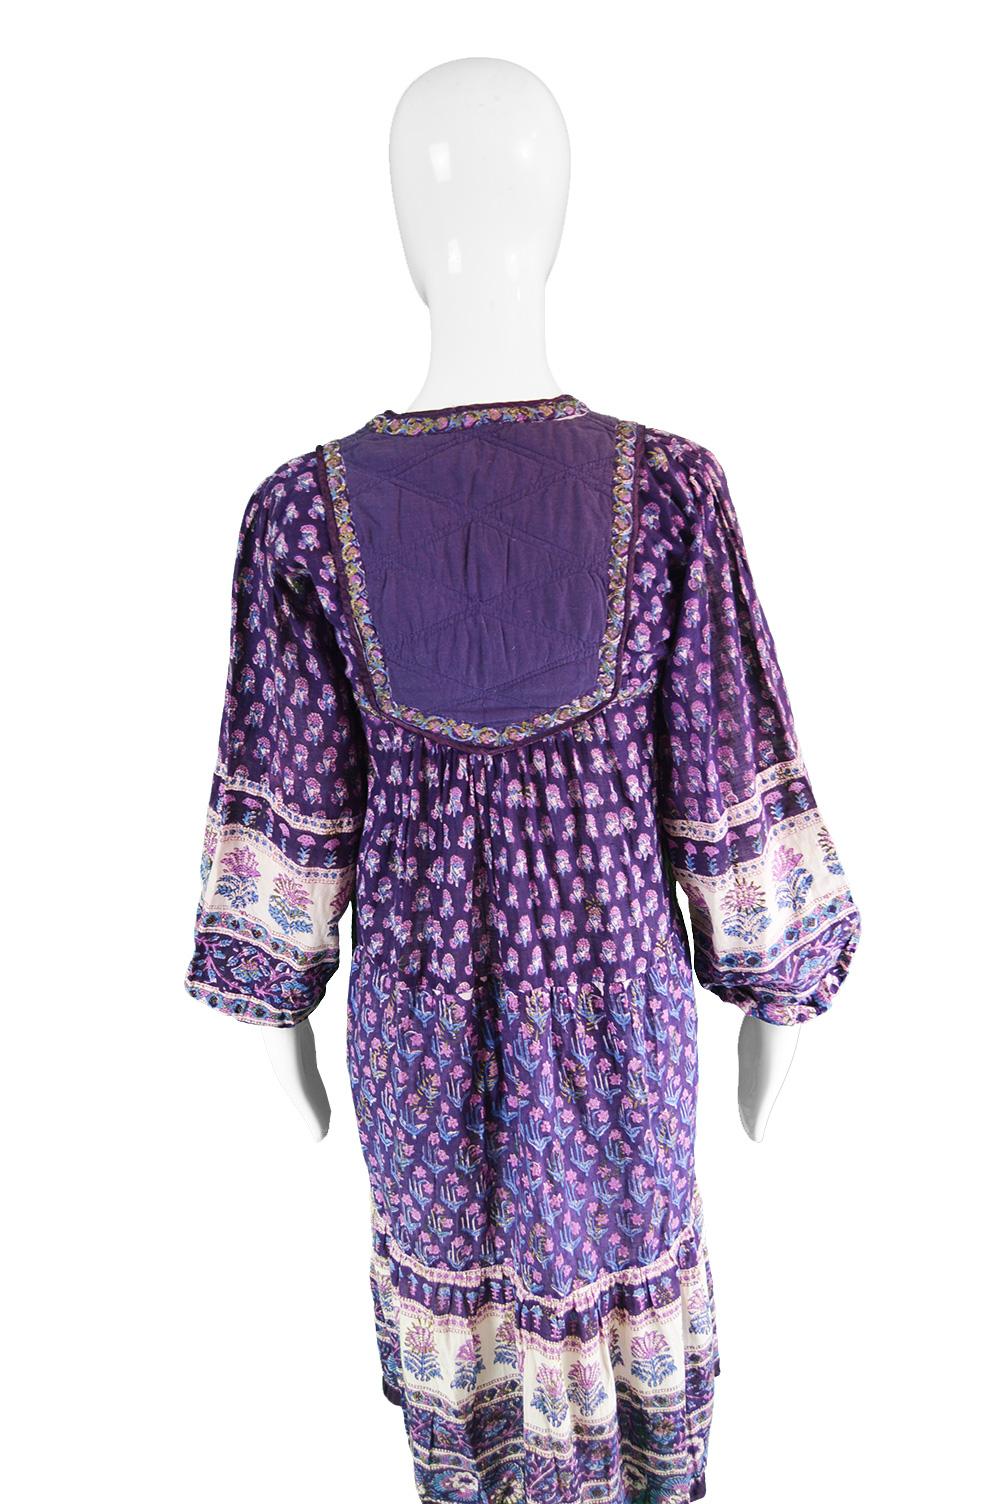 Alpnani Purple Indian Cotton Gauze Block Printed Quilted Boho Dress, 1970s For Sale 1